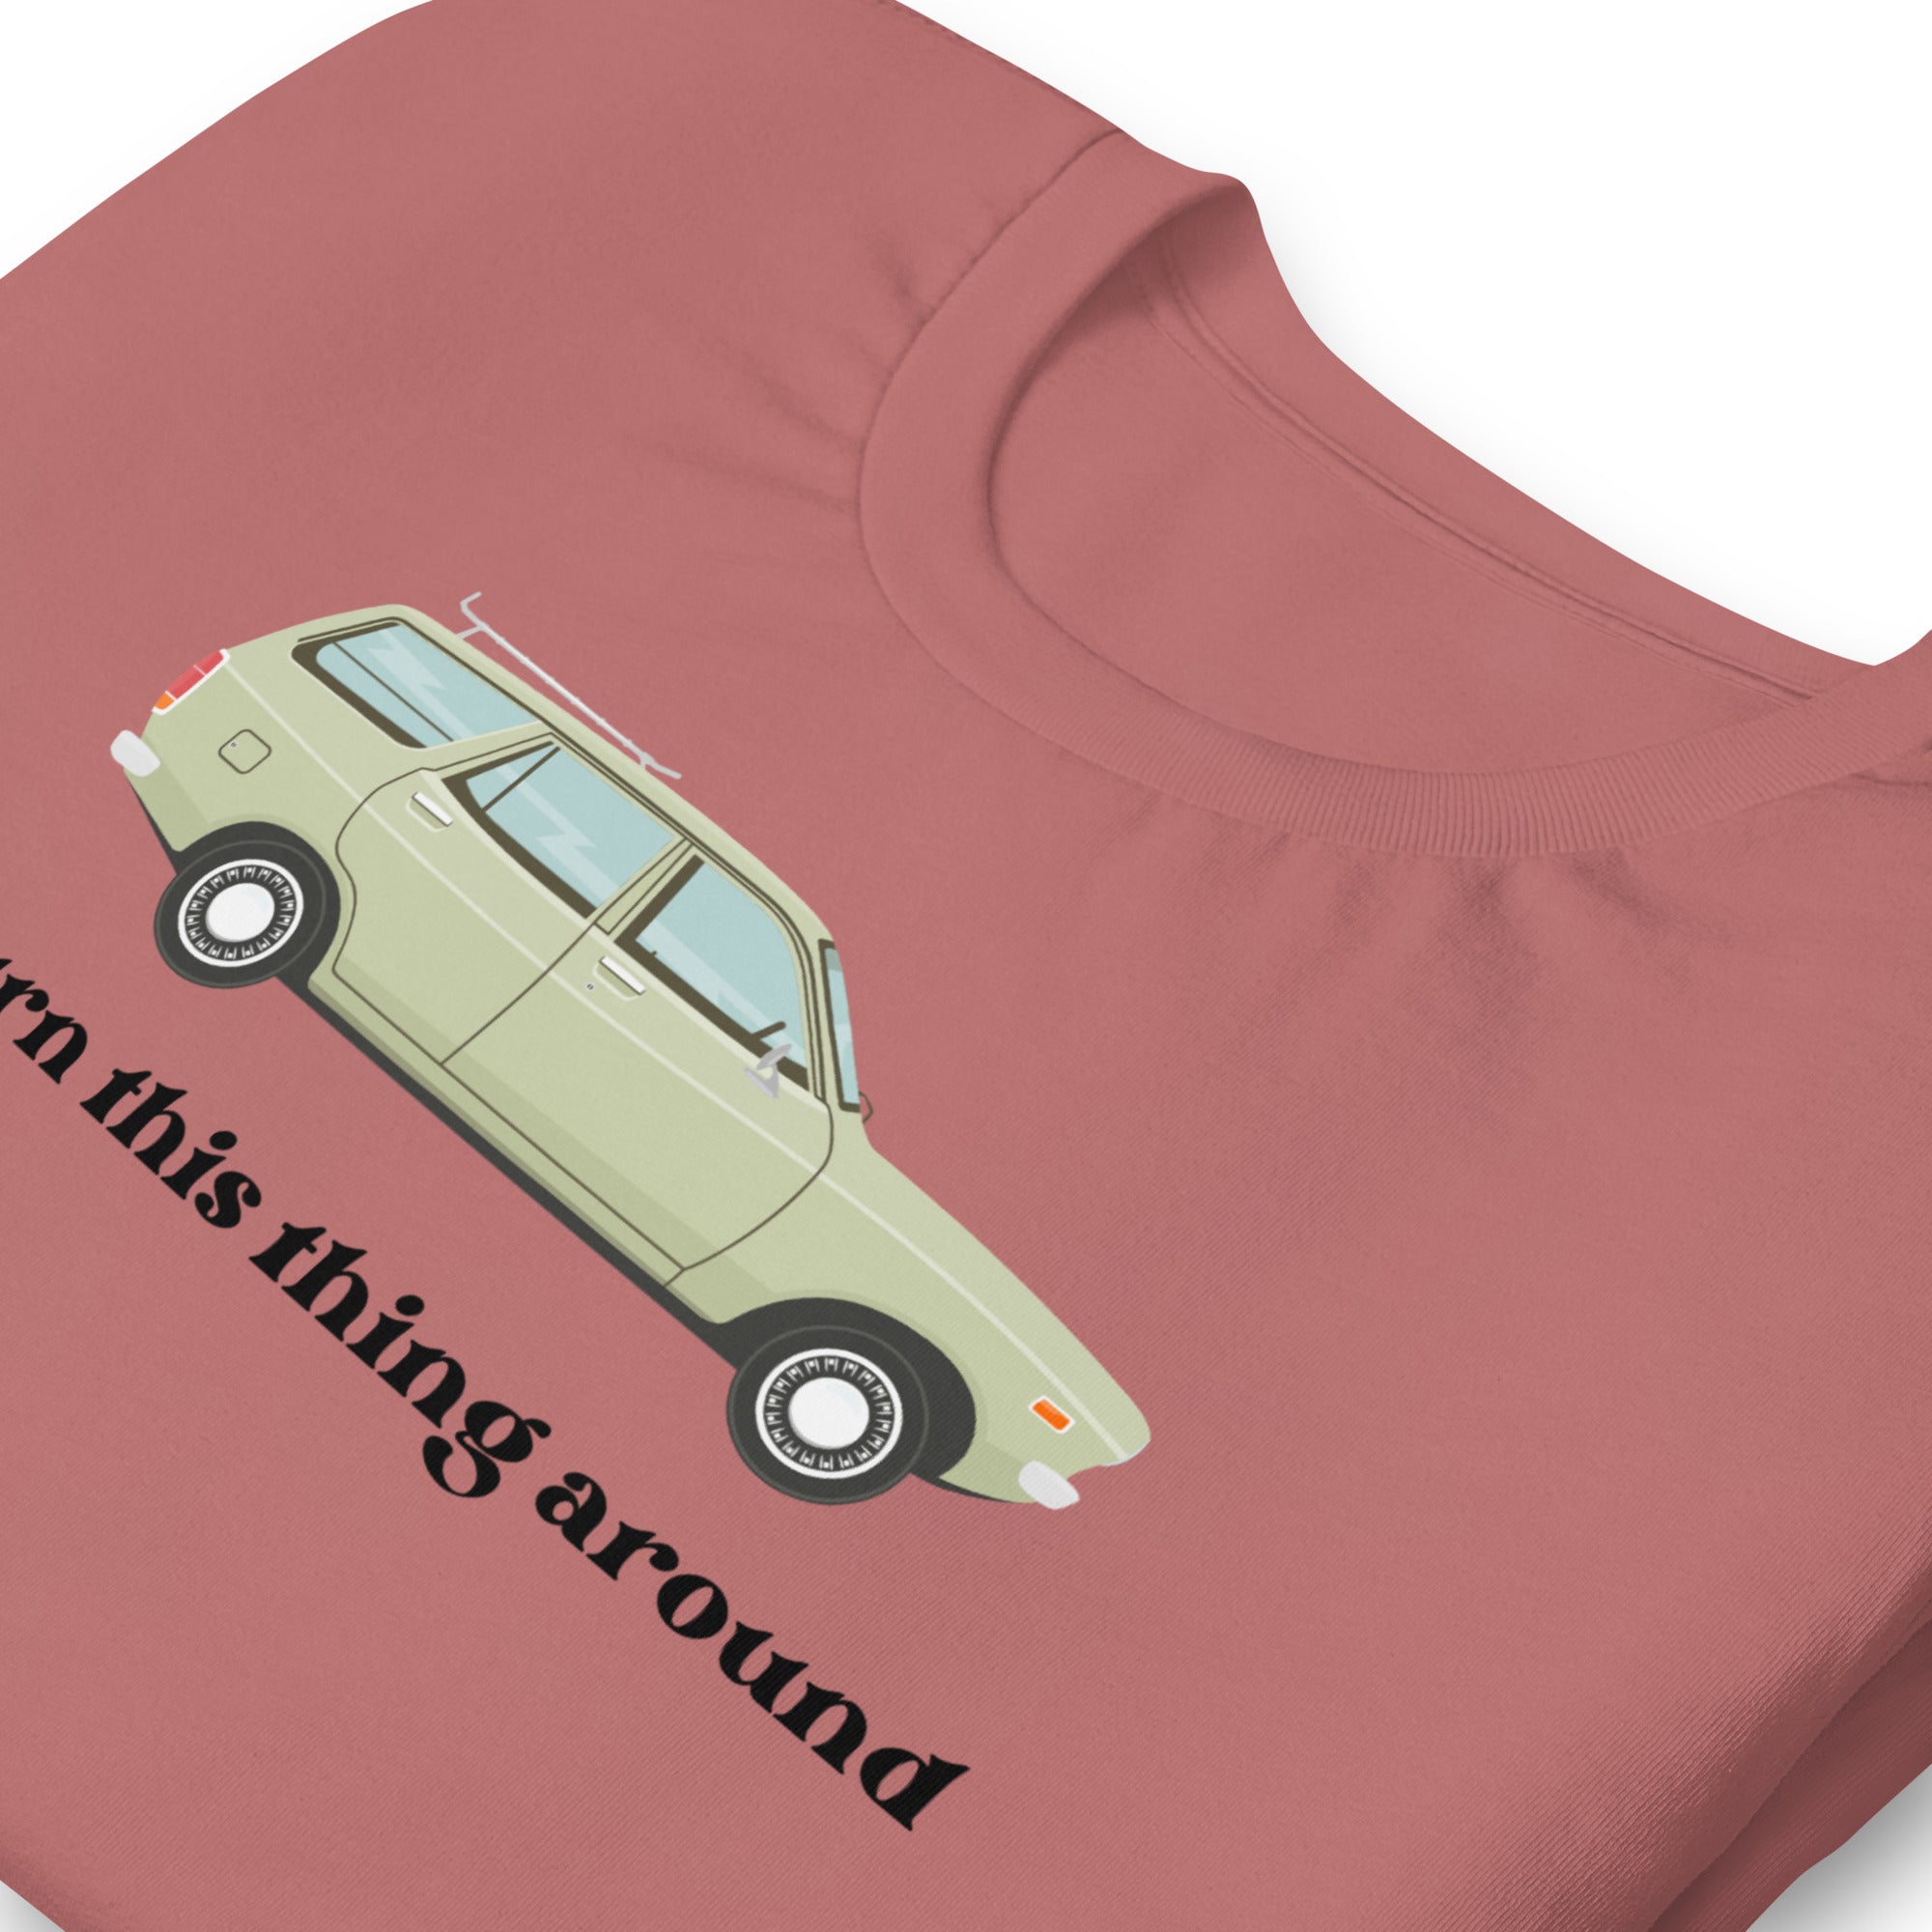 Funny shirt for dad with a station wagon on it.  I'll turn it around